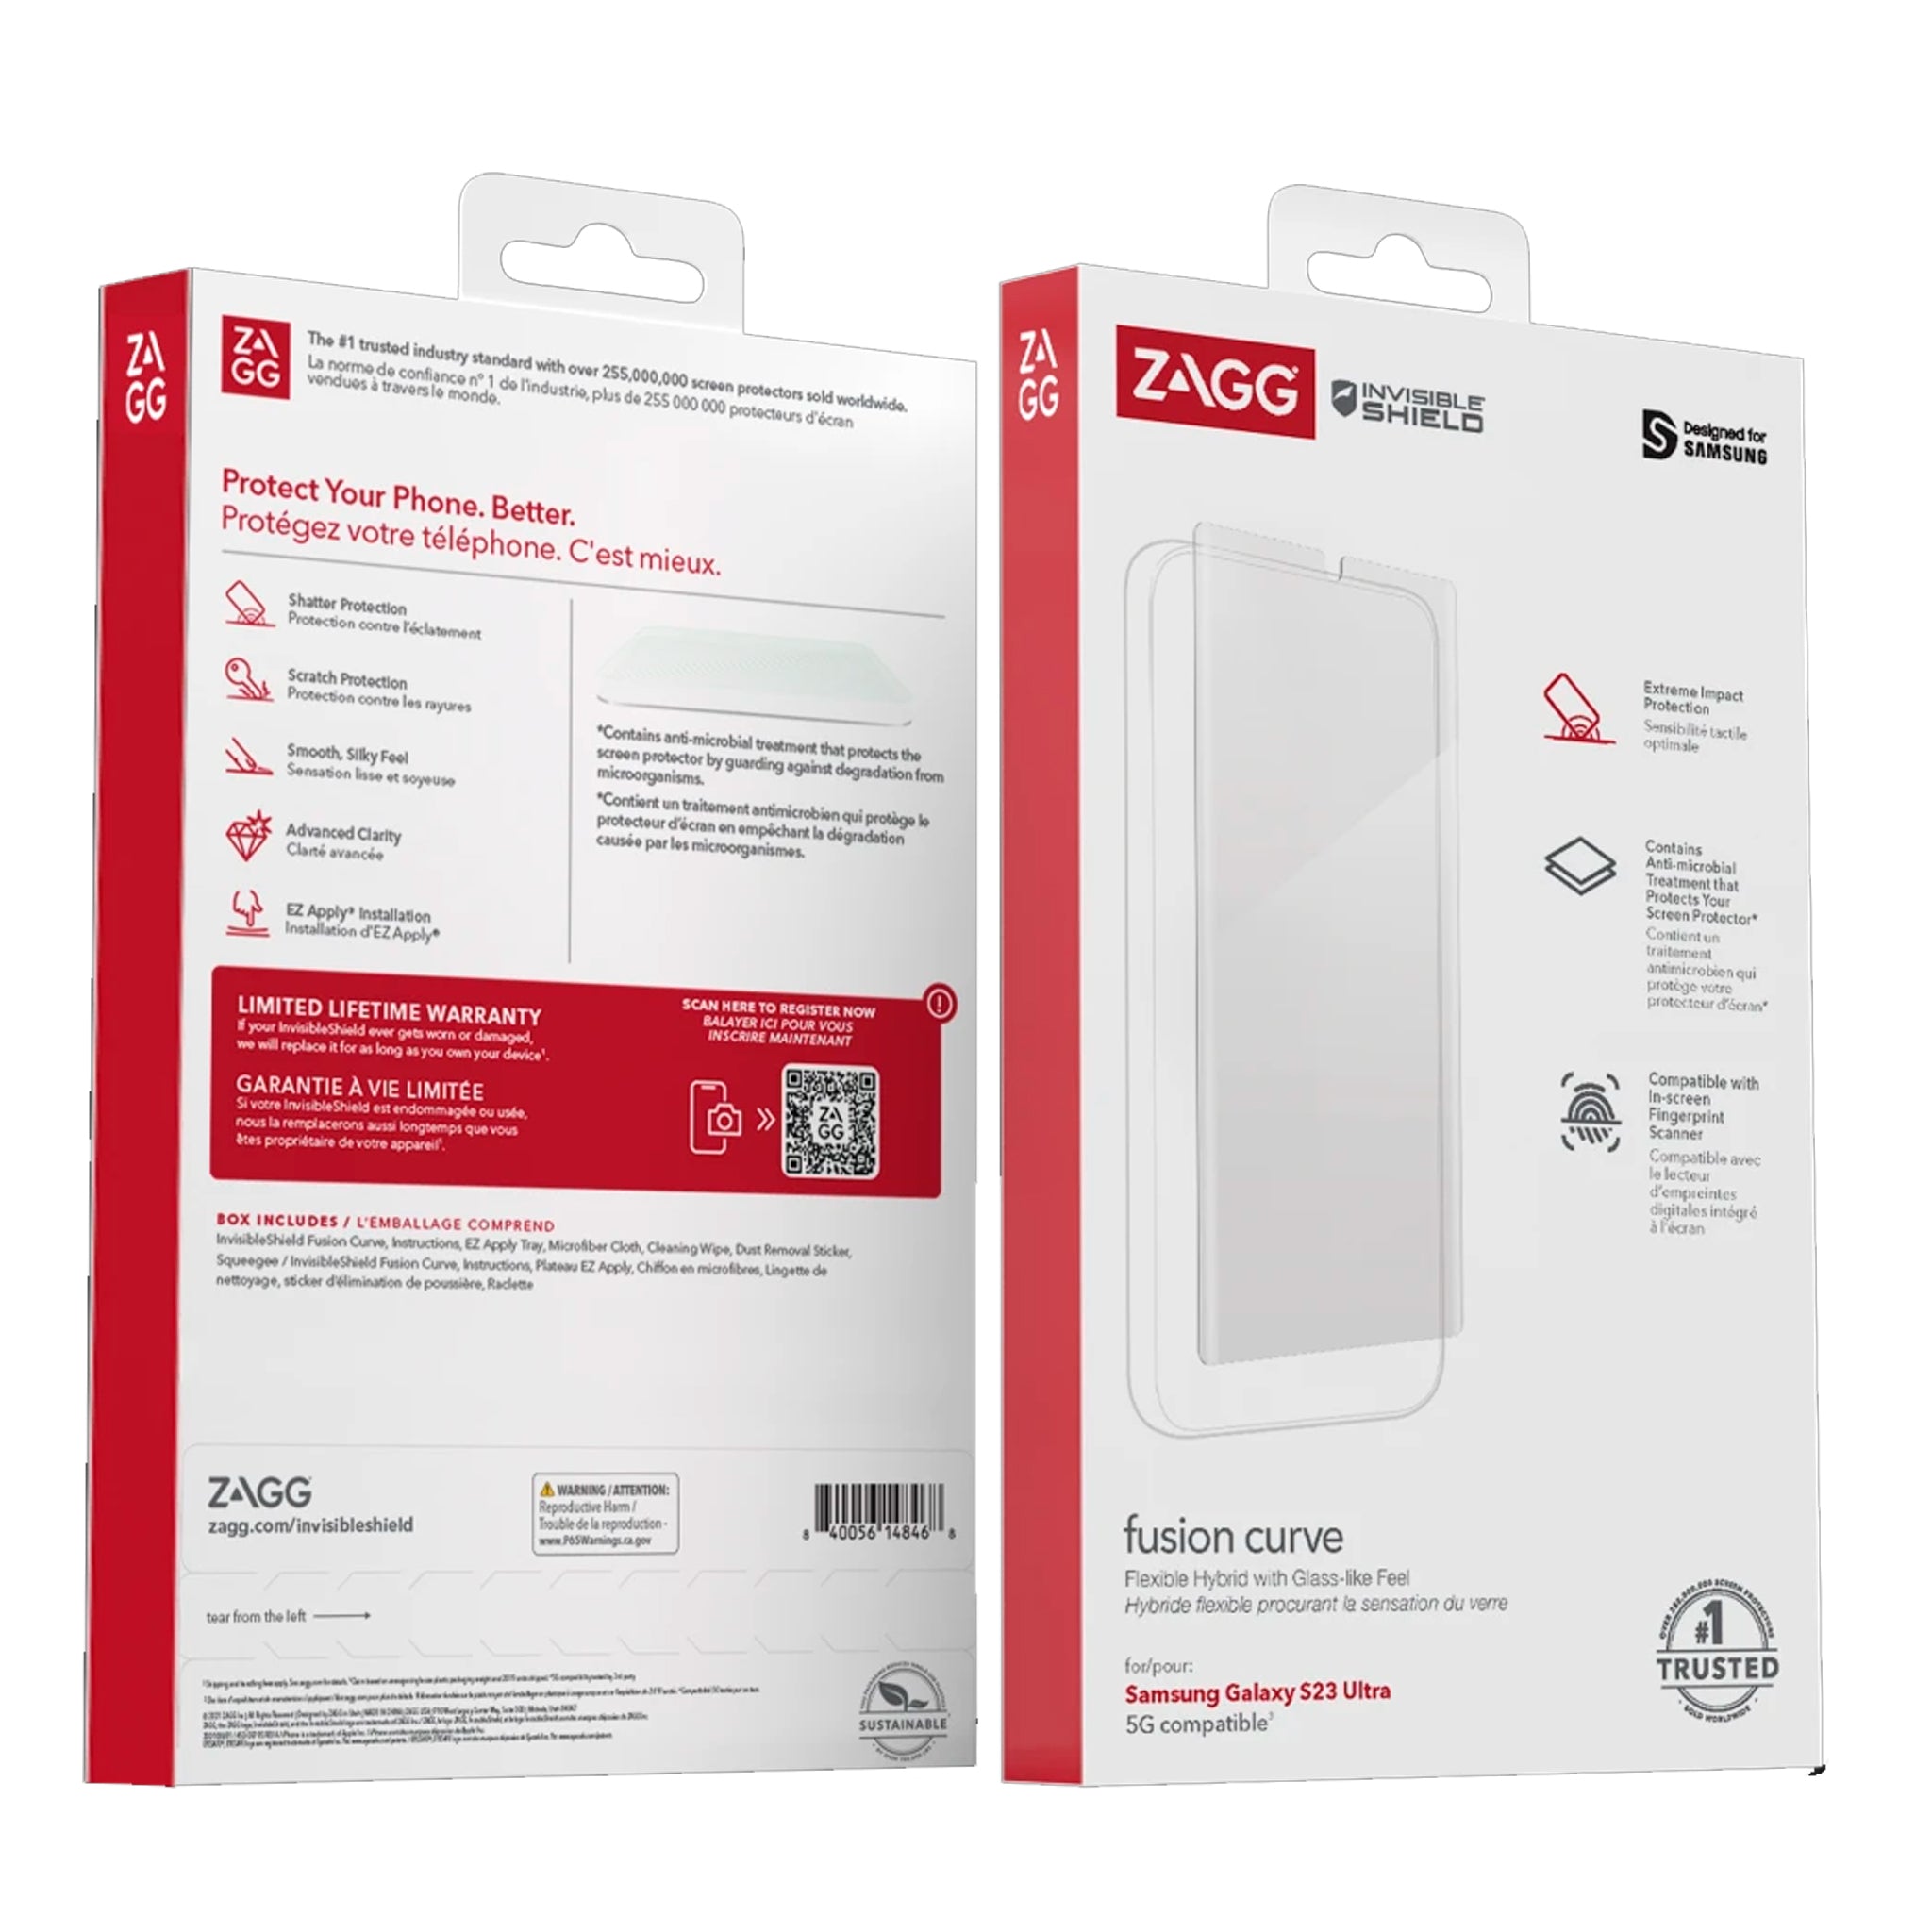 Zagg - Invisibleshield Glassfusion Curved Antimicrobial Hybrid Screen Protector For Samsung Galaxy S23 Ultra - Clear